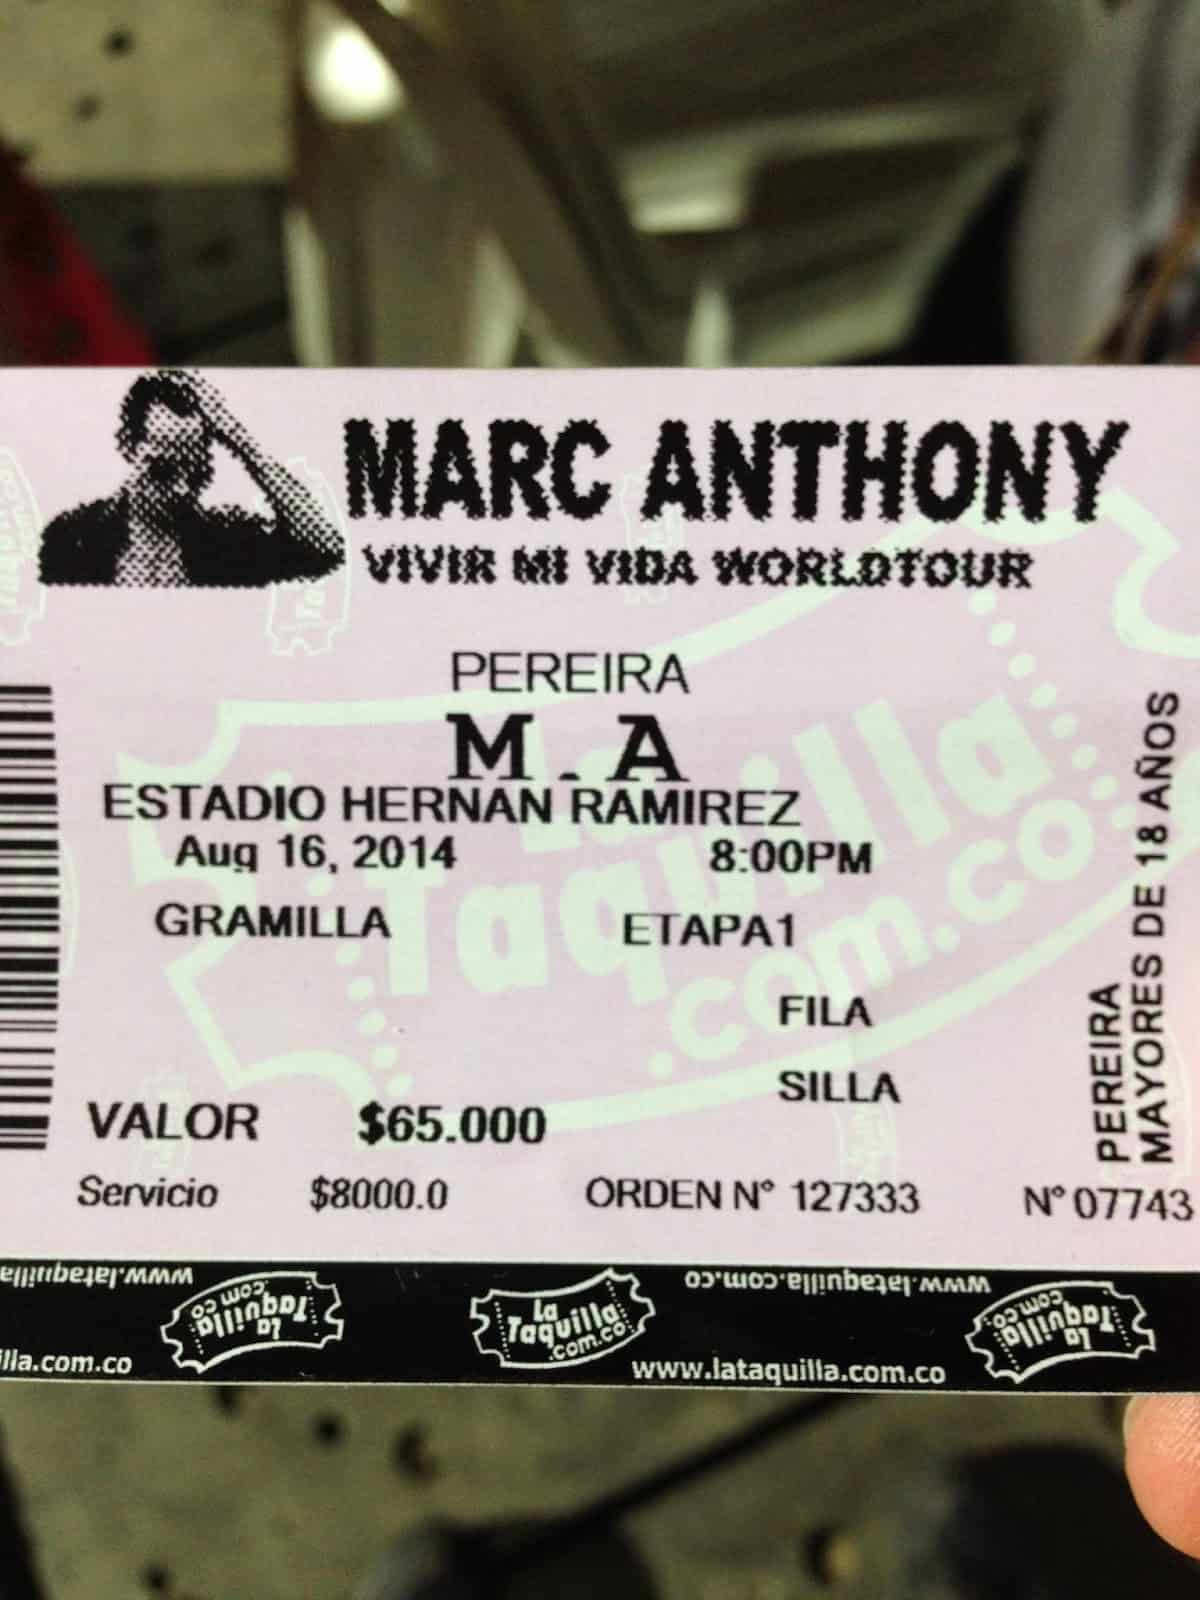 My ticket to the Marc Anthony concert in Pereira, Risaralda, Colombia